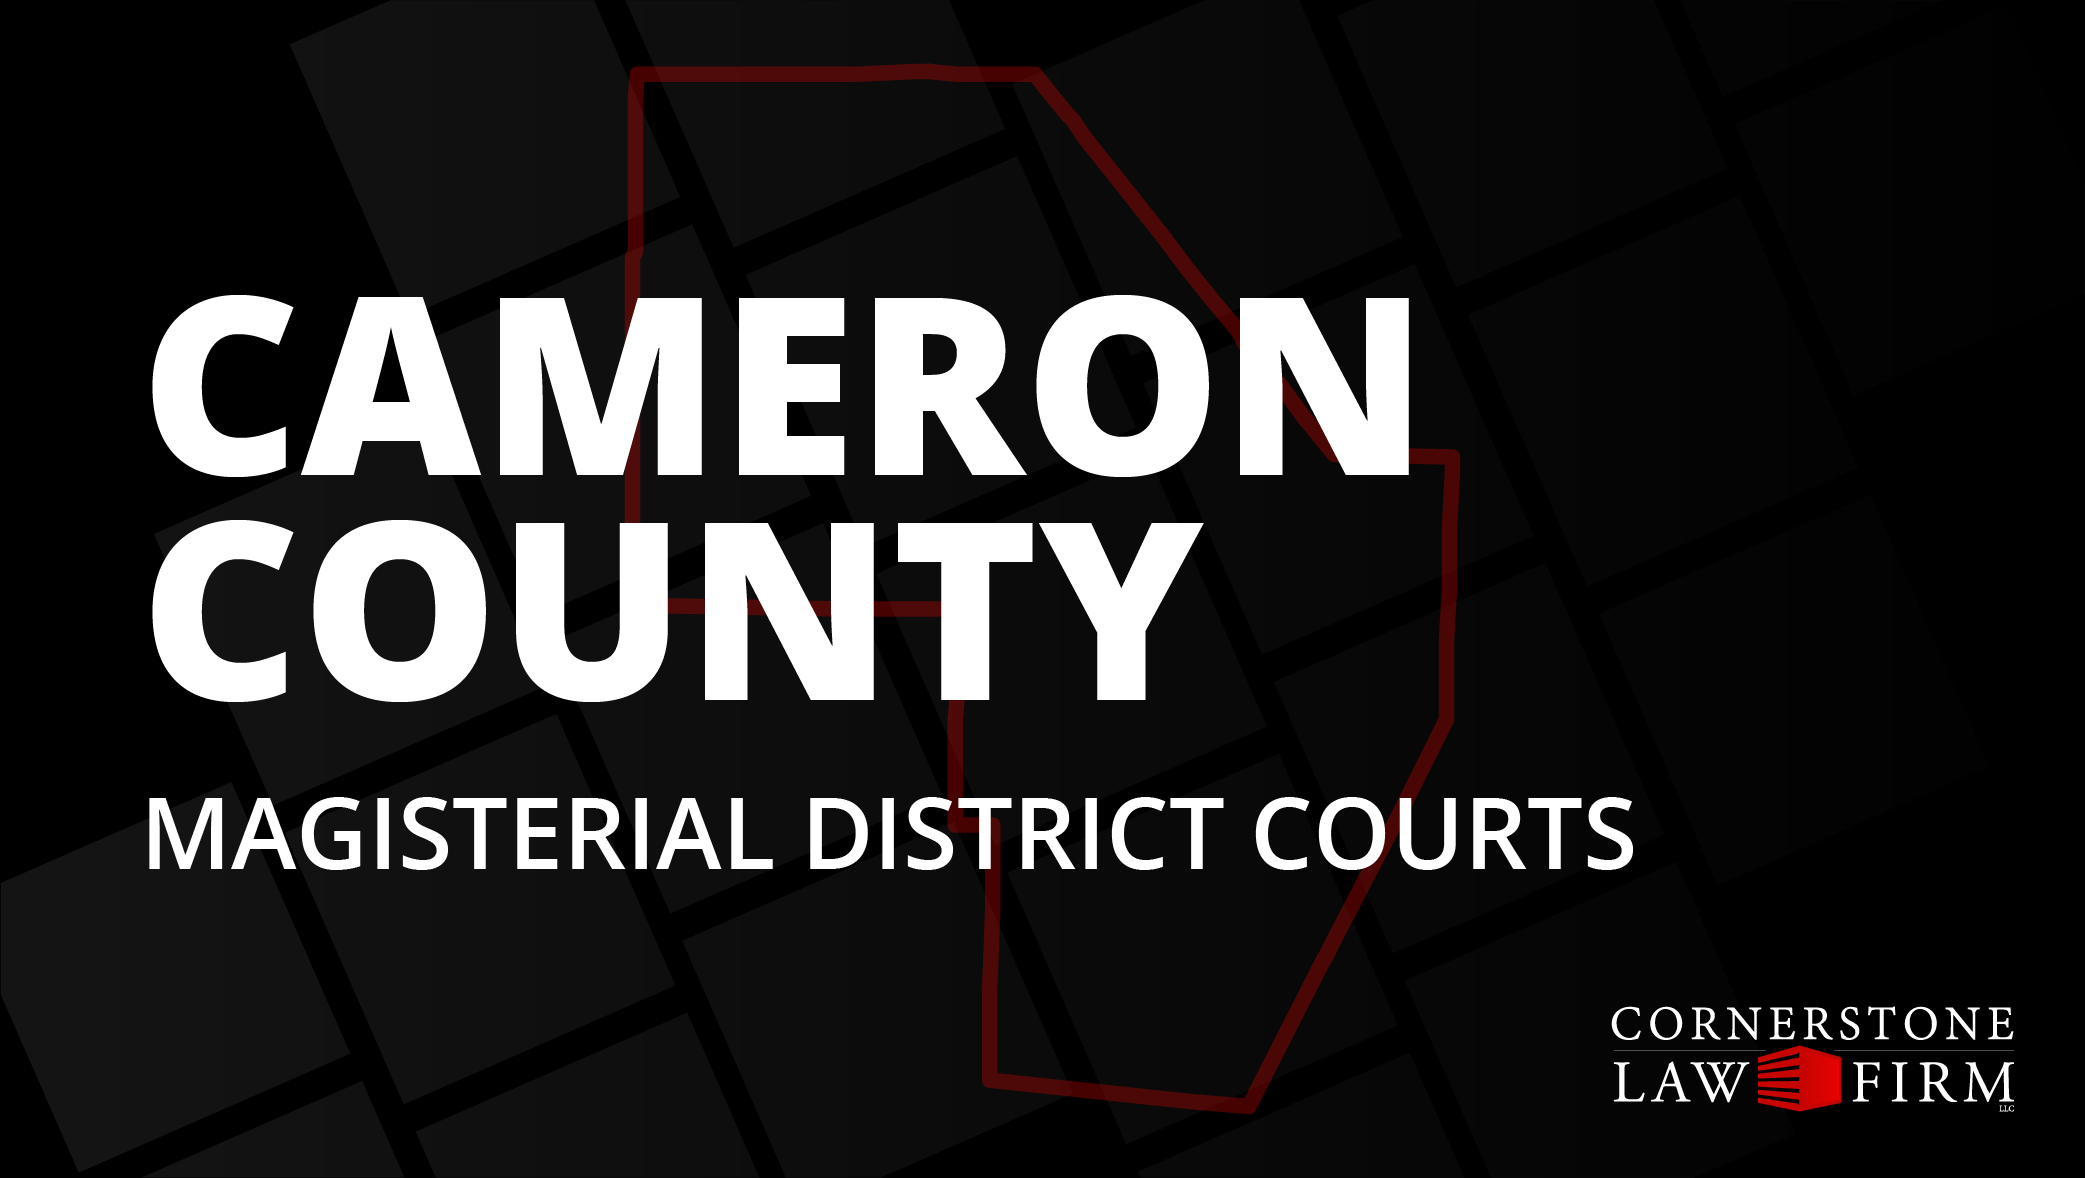 The words "Cameron County Magisterial District Courts" over a black background with a faded red outline of the county.